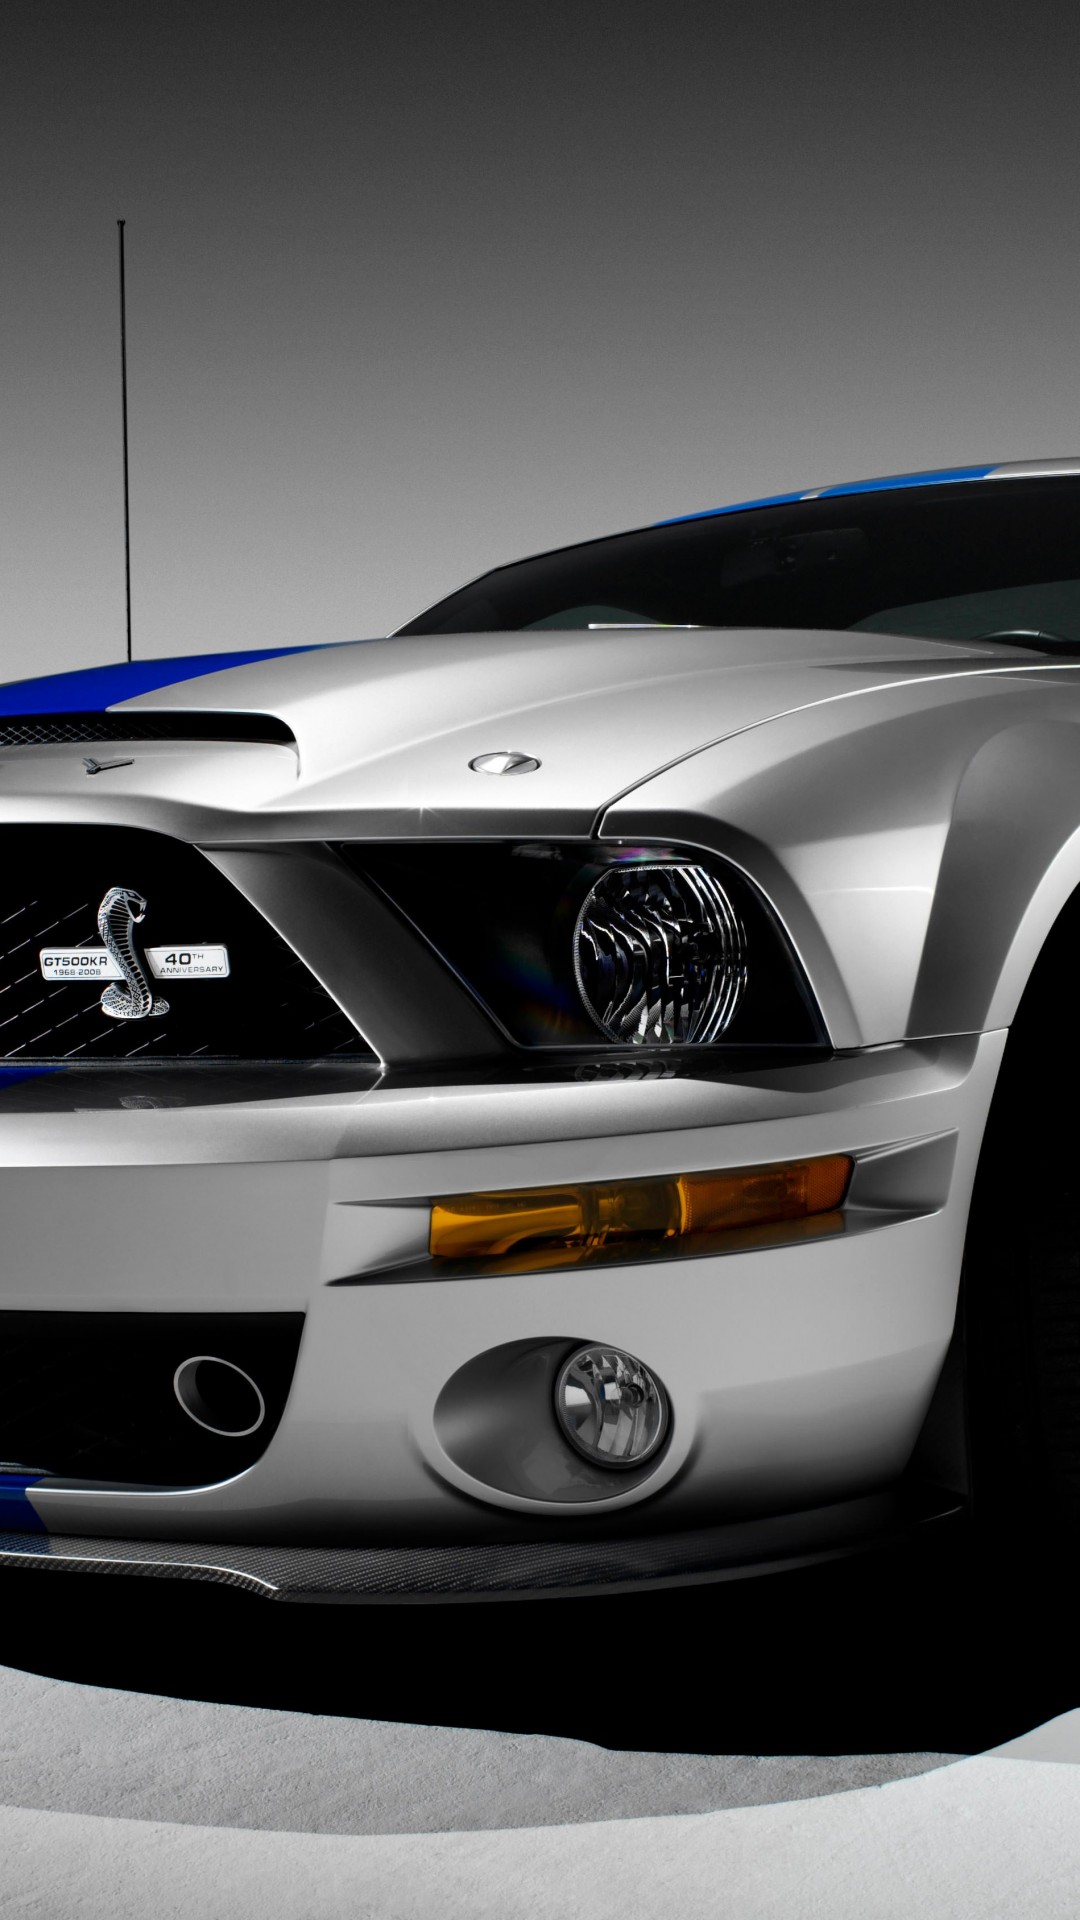 Shelby Mustang GT500KR Wallpaper for SAMSUNG Galaxy S5